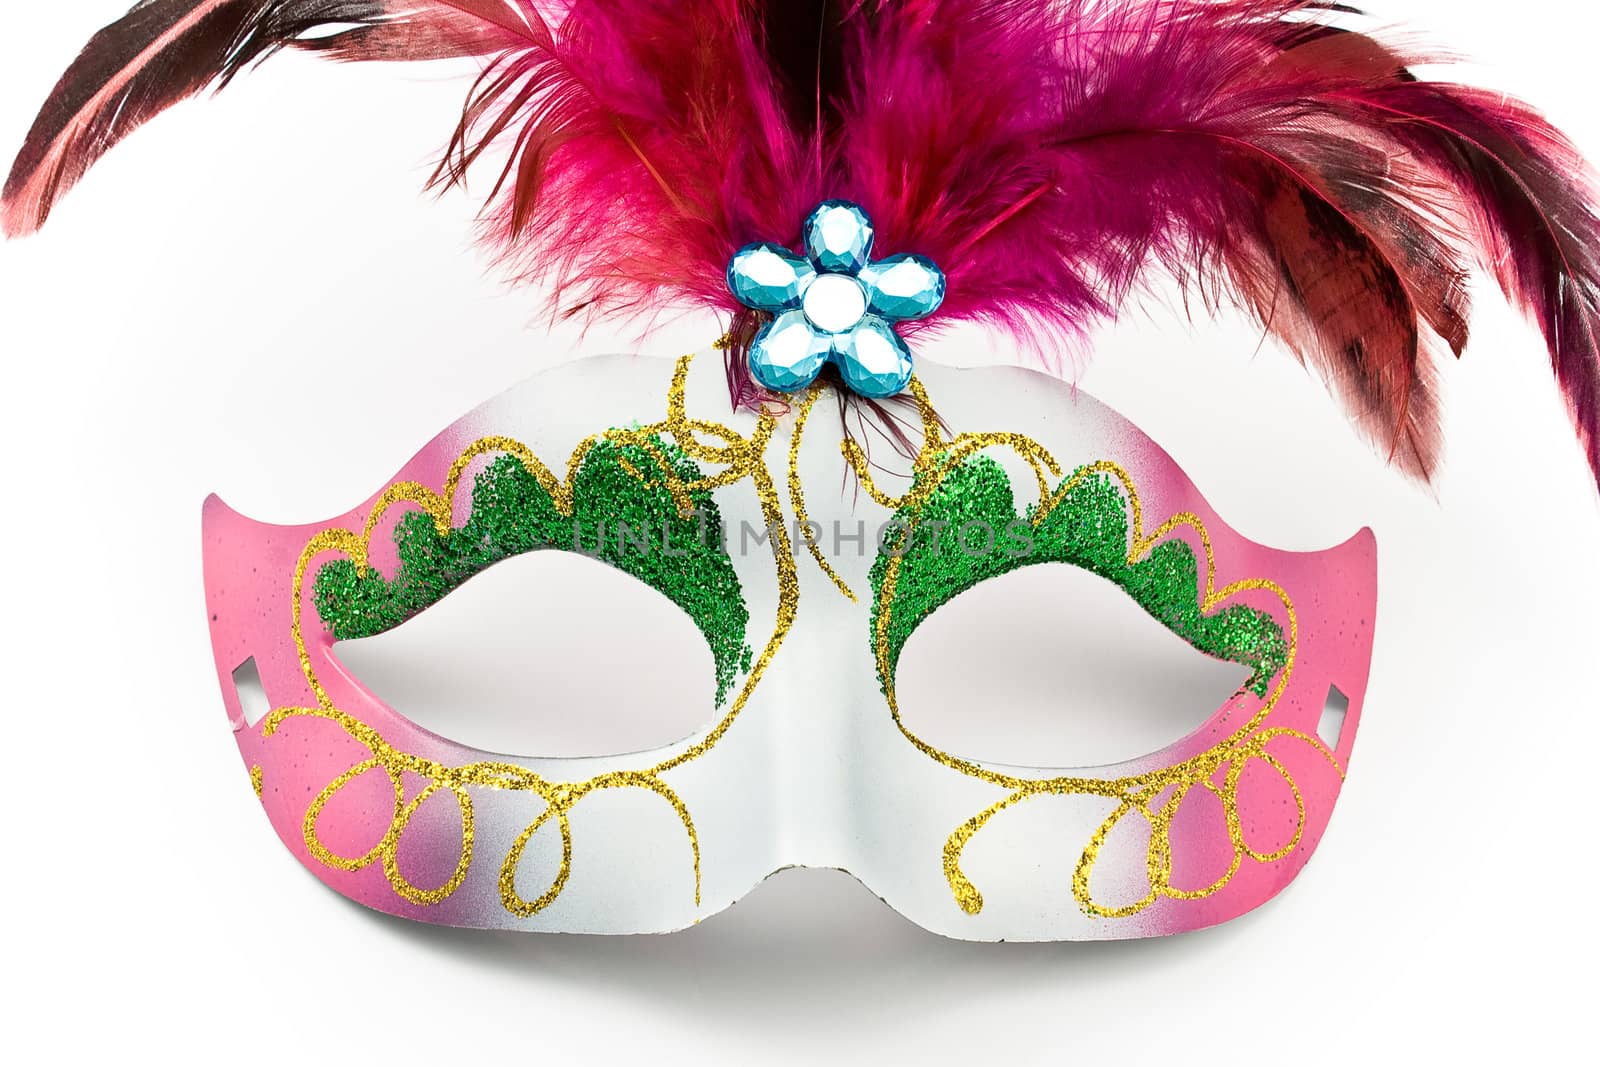 Carnival mask with feathers and diamond by gavran333